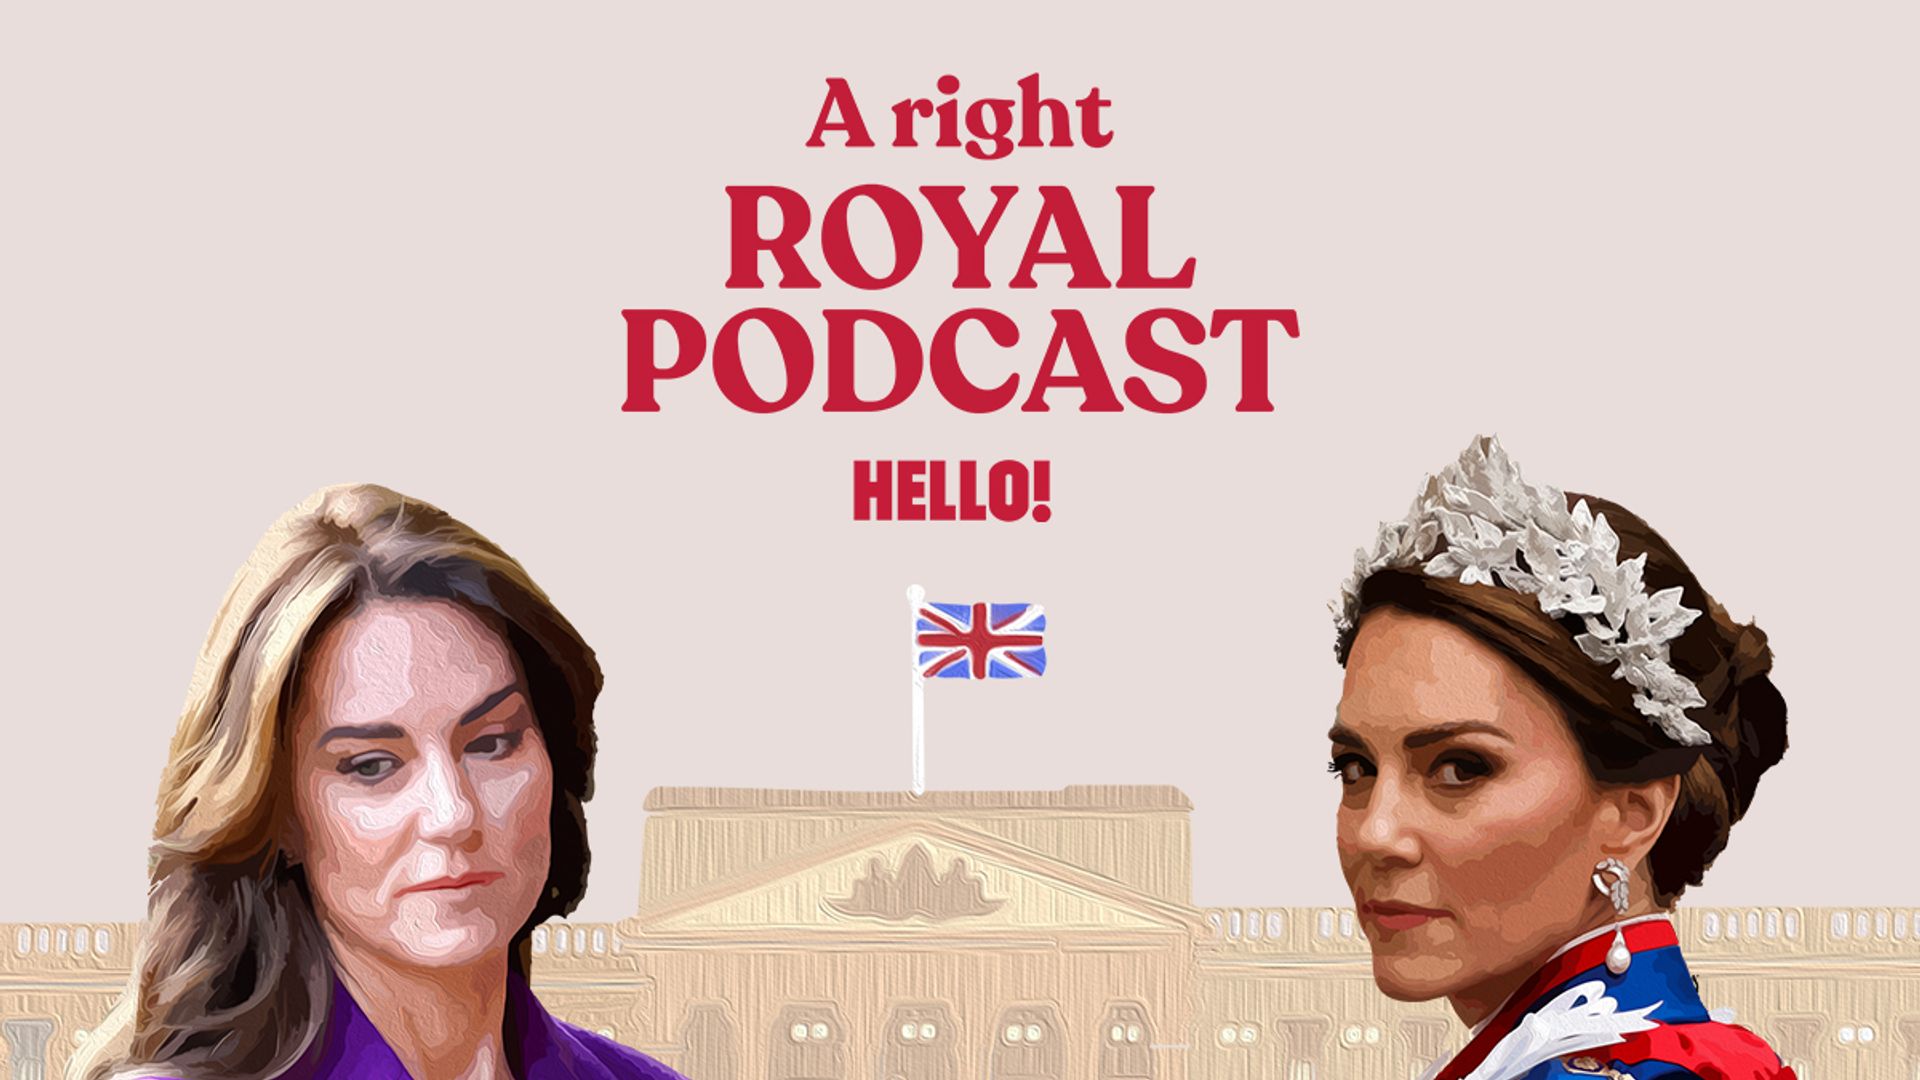 A Right Royal Podcast episode of Kate